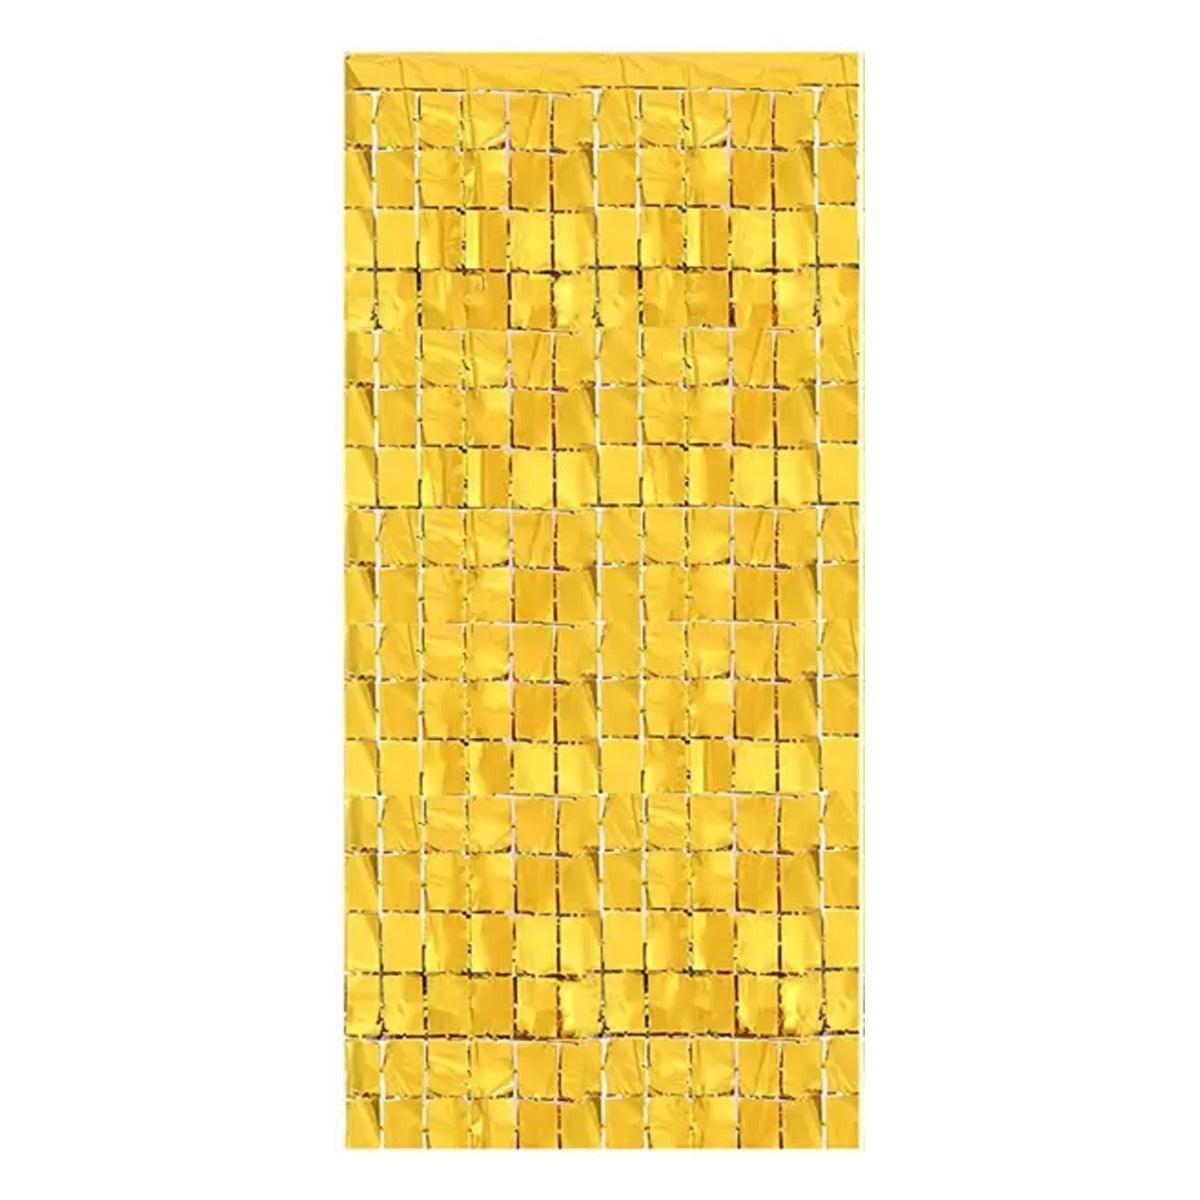 PartyCorp Square Shaped Metallic Golden Foil Curtain, 1 Pack